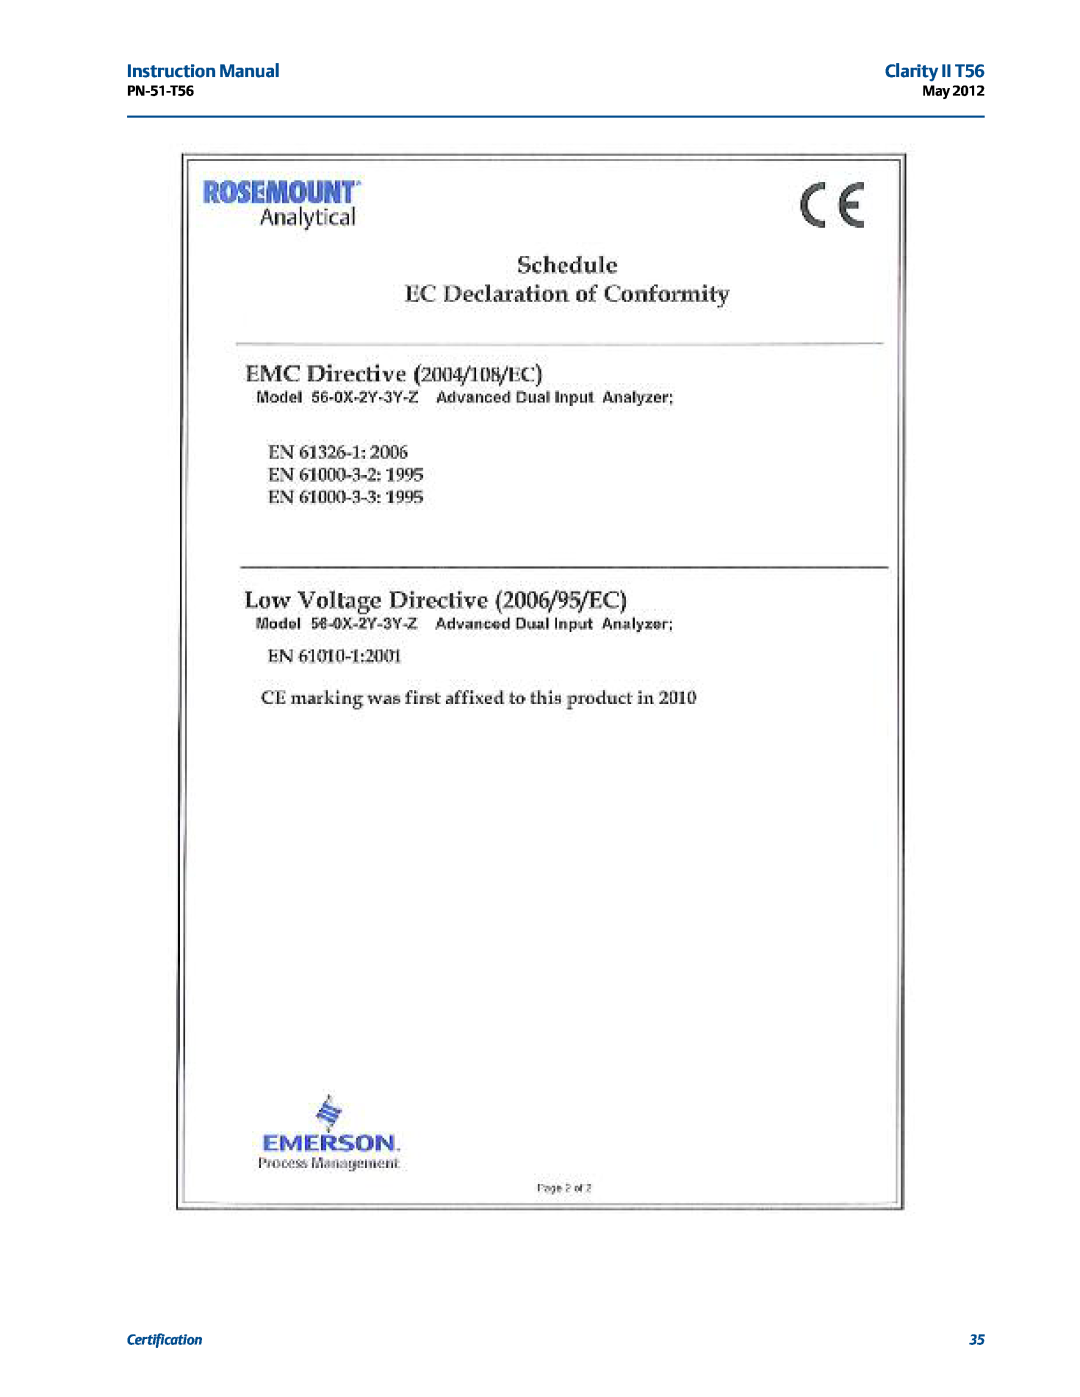 Emerson PN-51-T56 instruction manual Clarity II T56, Certification 